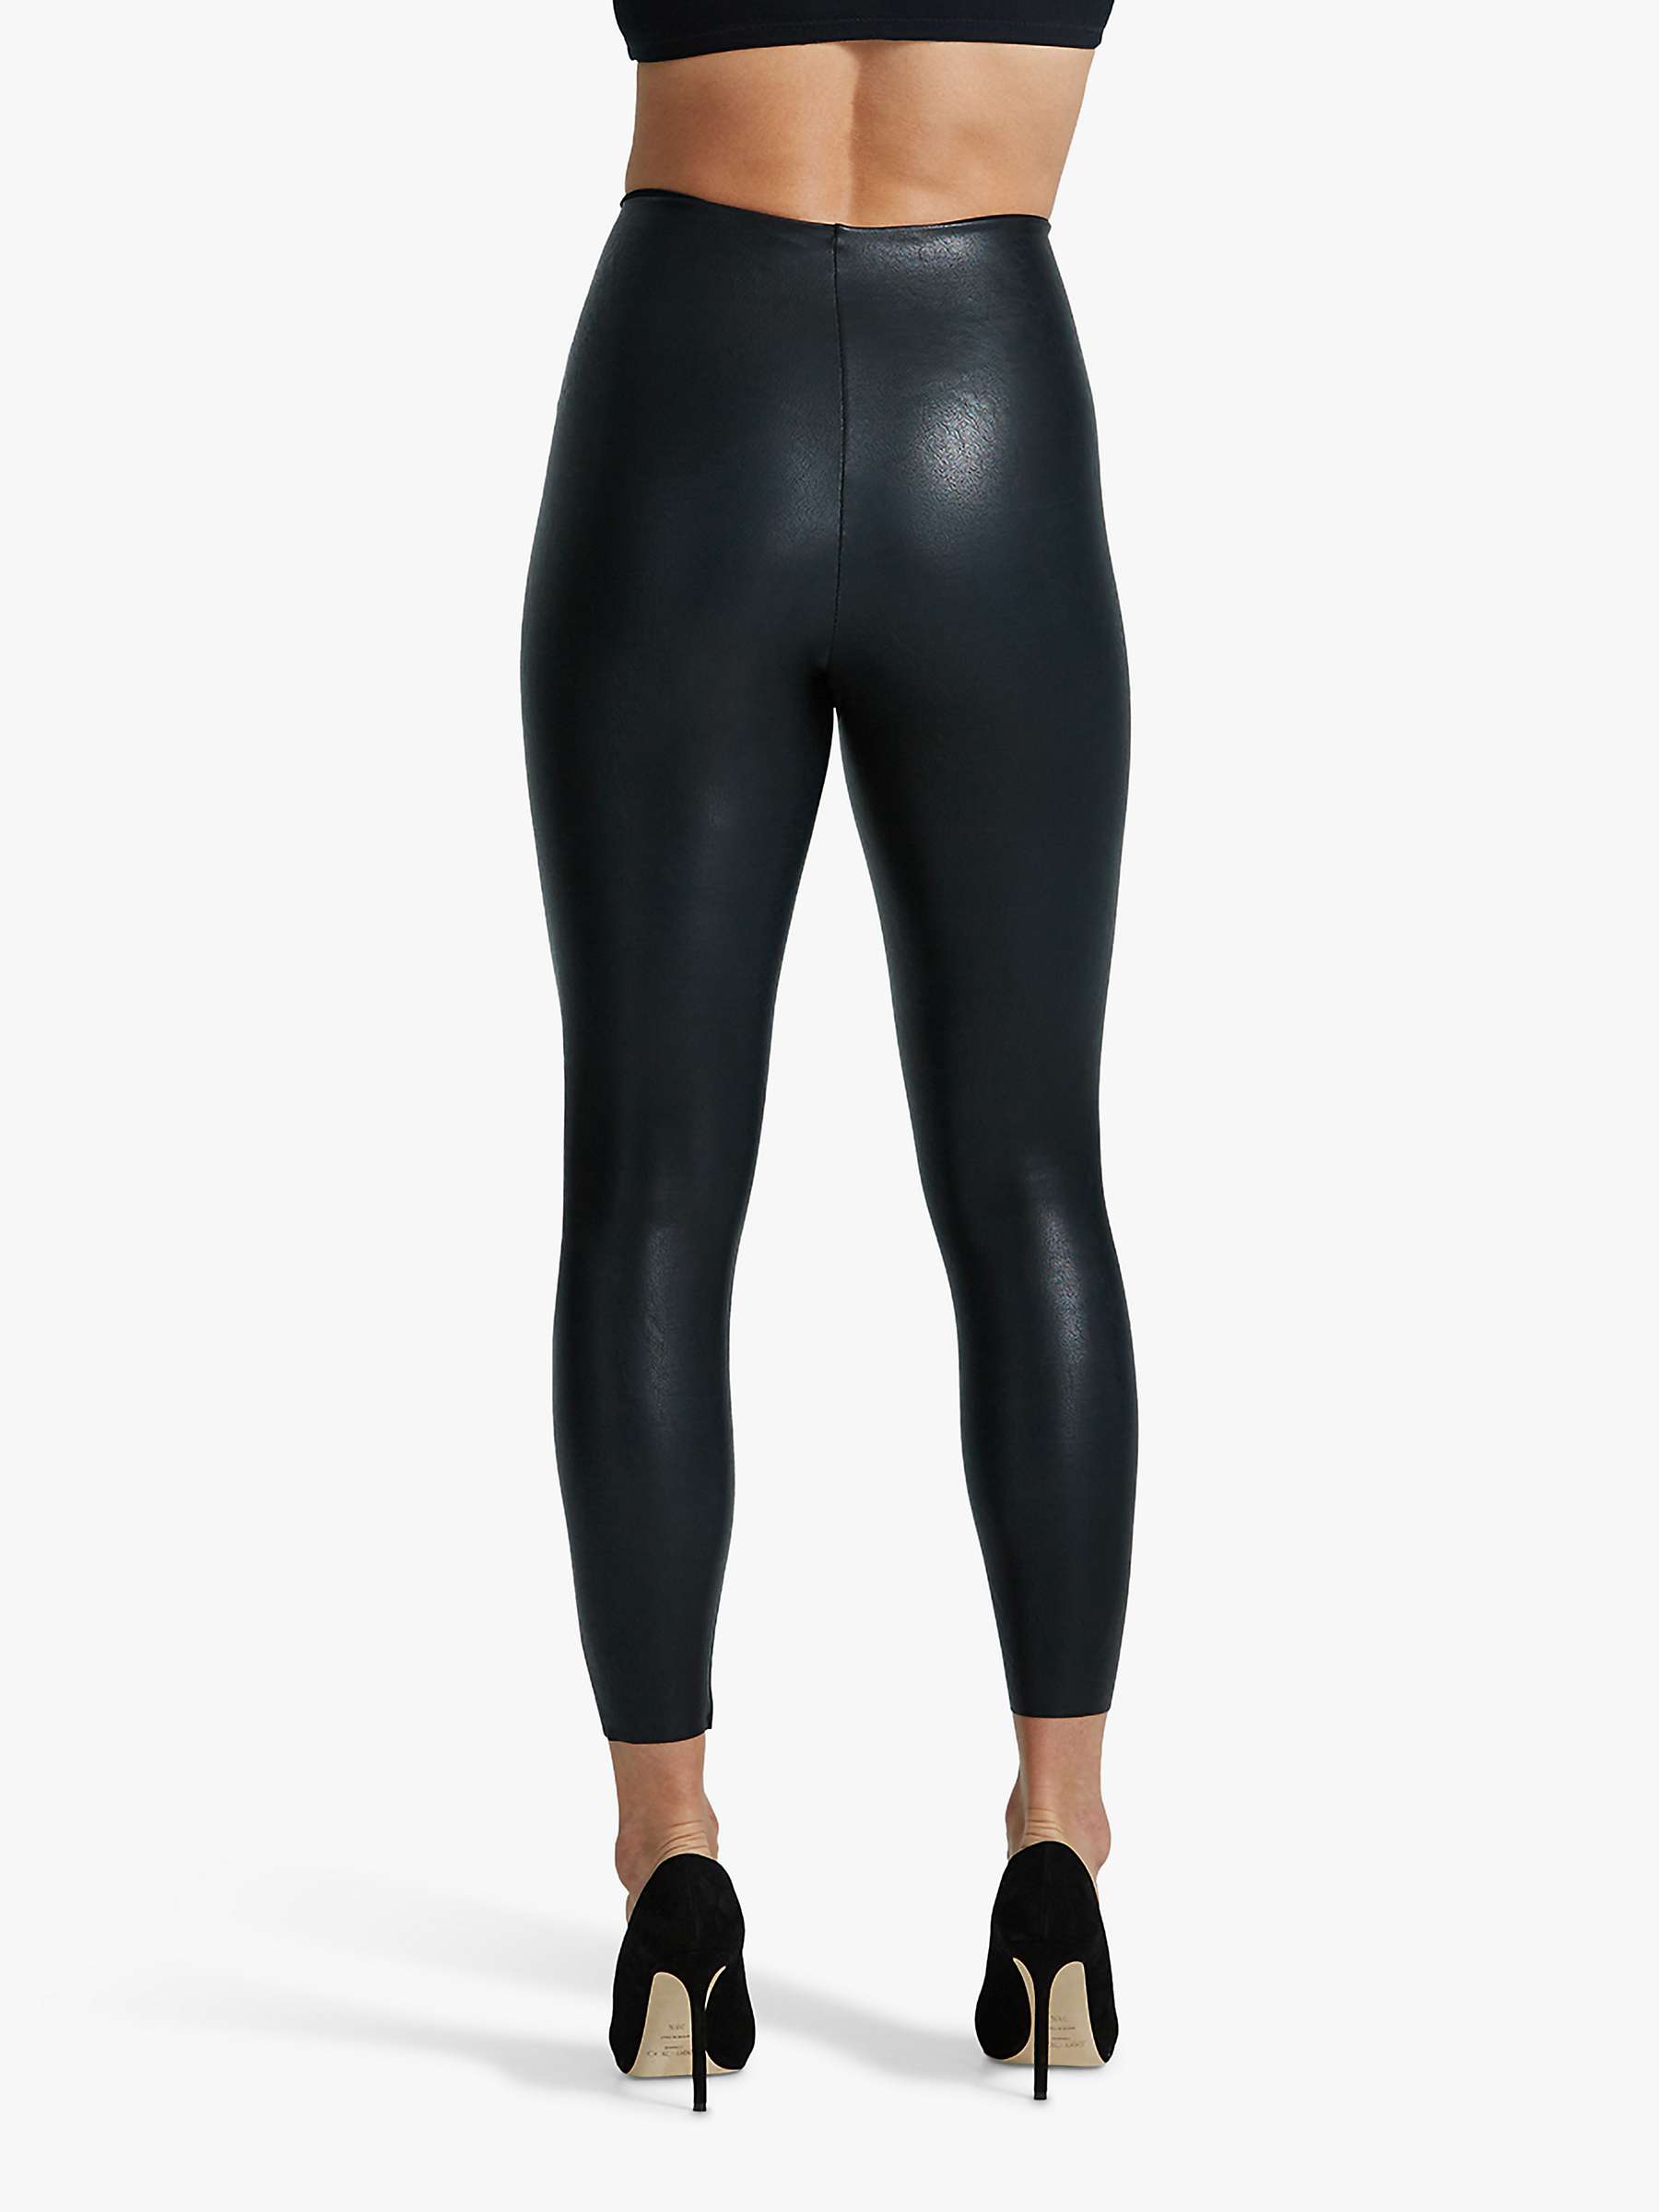 Buy Commando 7/8 Faux Leather Smoothing Leggings, Black Online at johnlewis.com